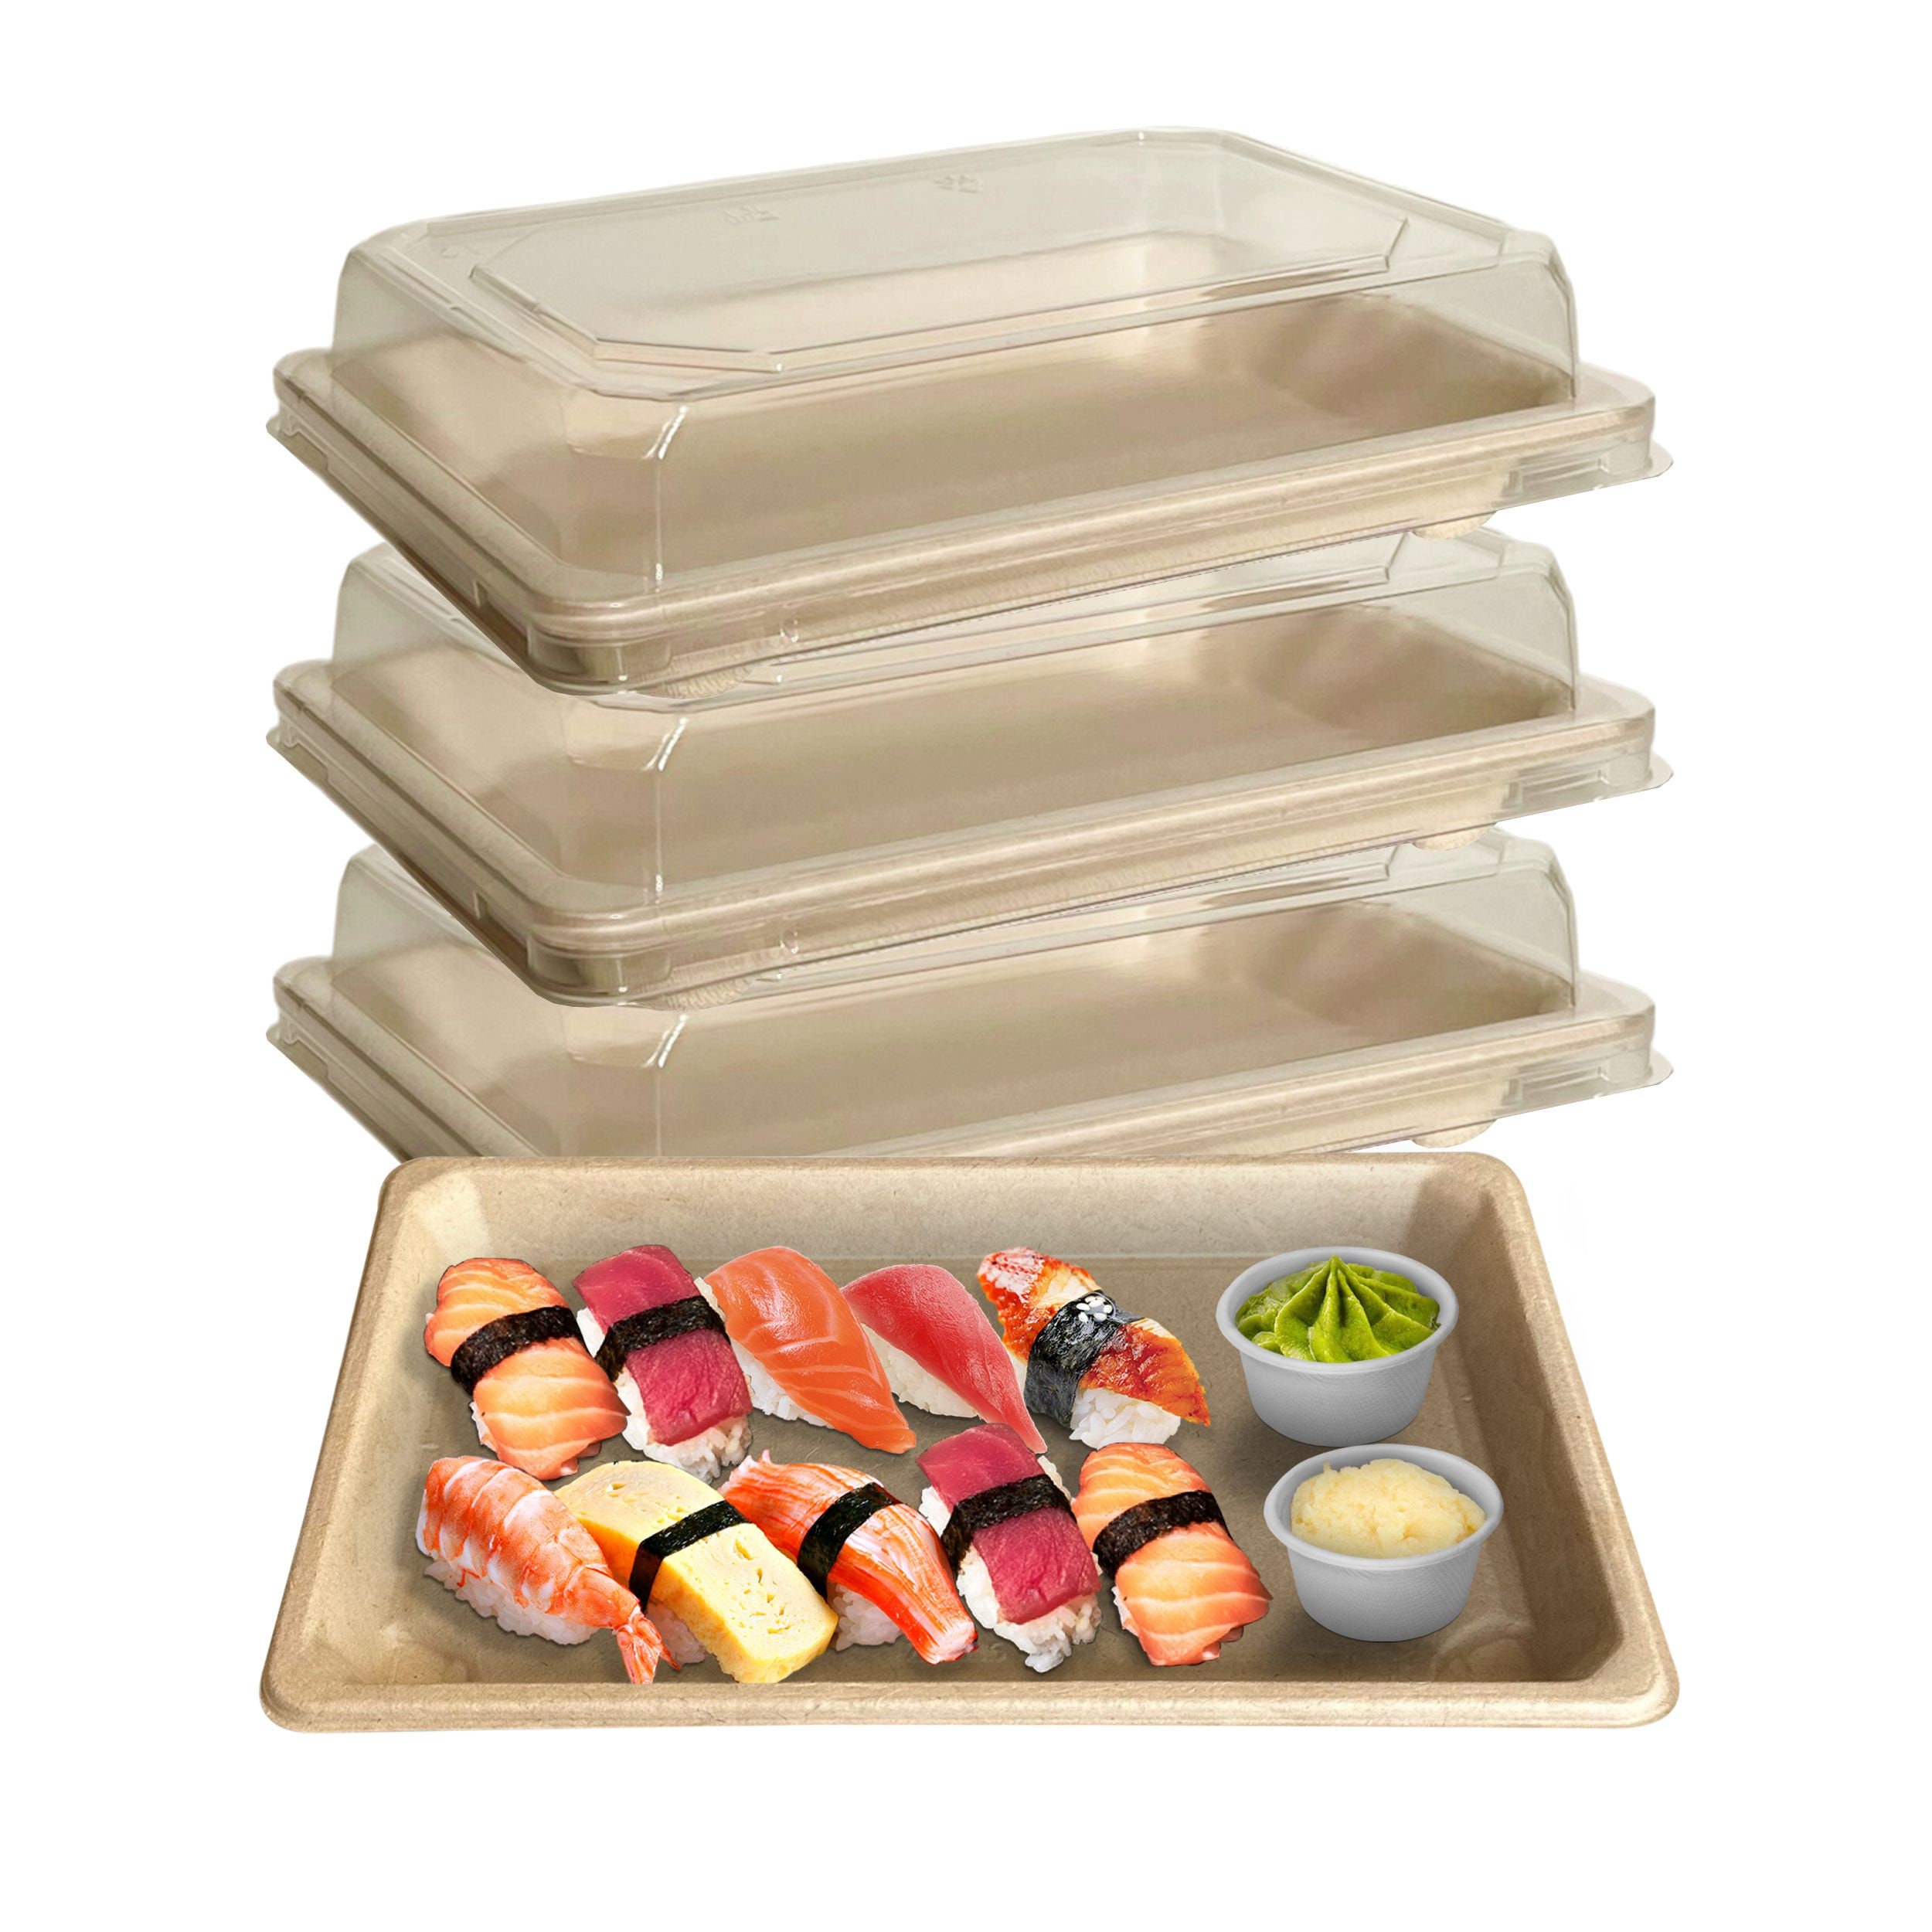 EcoQuality Black Sushi Trays with Lids 7.25 x 5 inch - Disposable Sushi Packaging Box, Carry Out Container, Take Out Boxes, Black Plastic to Go